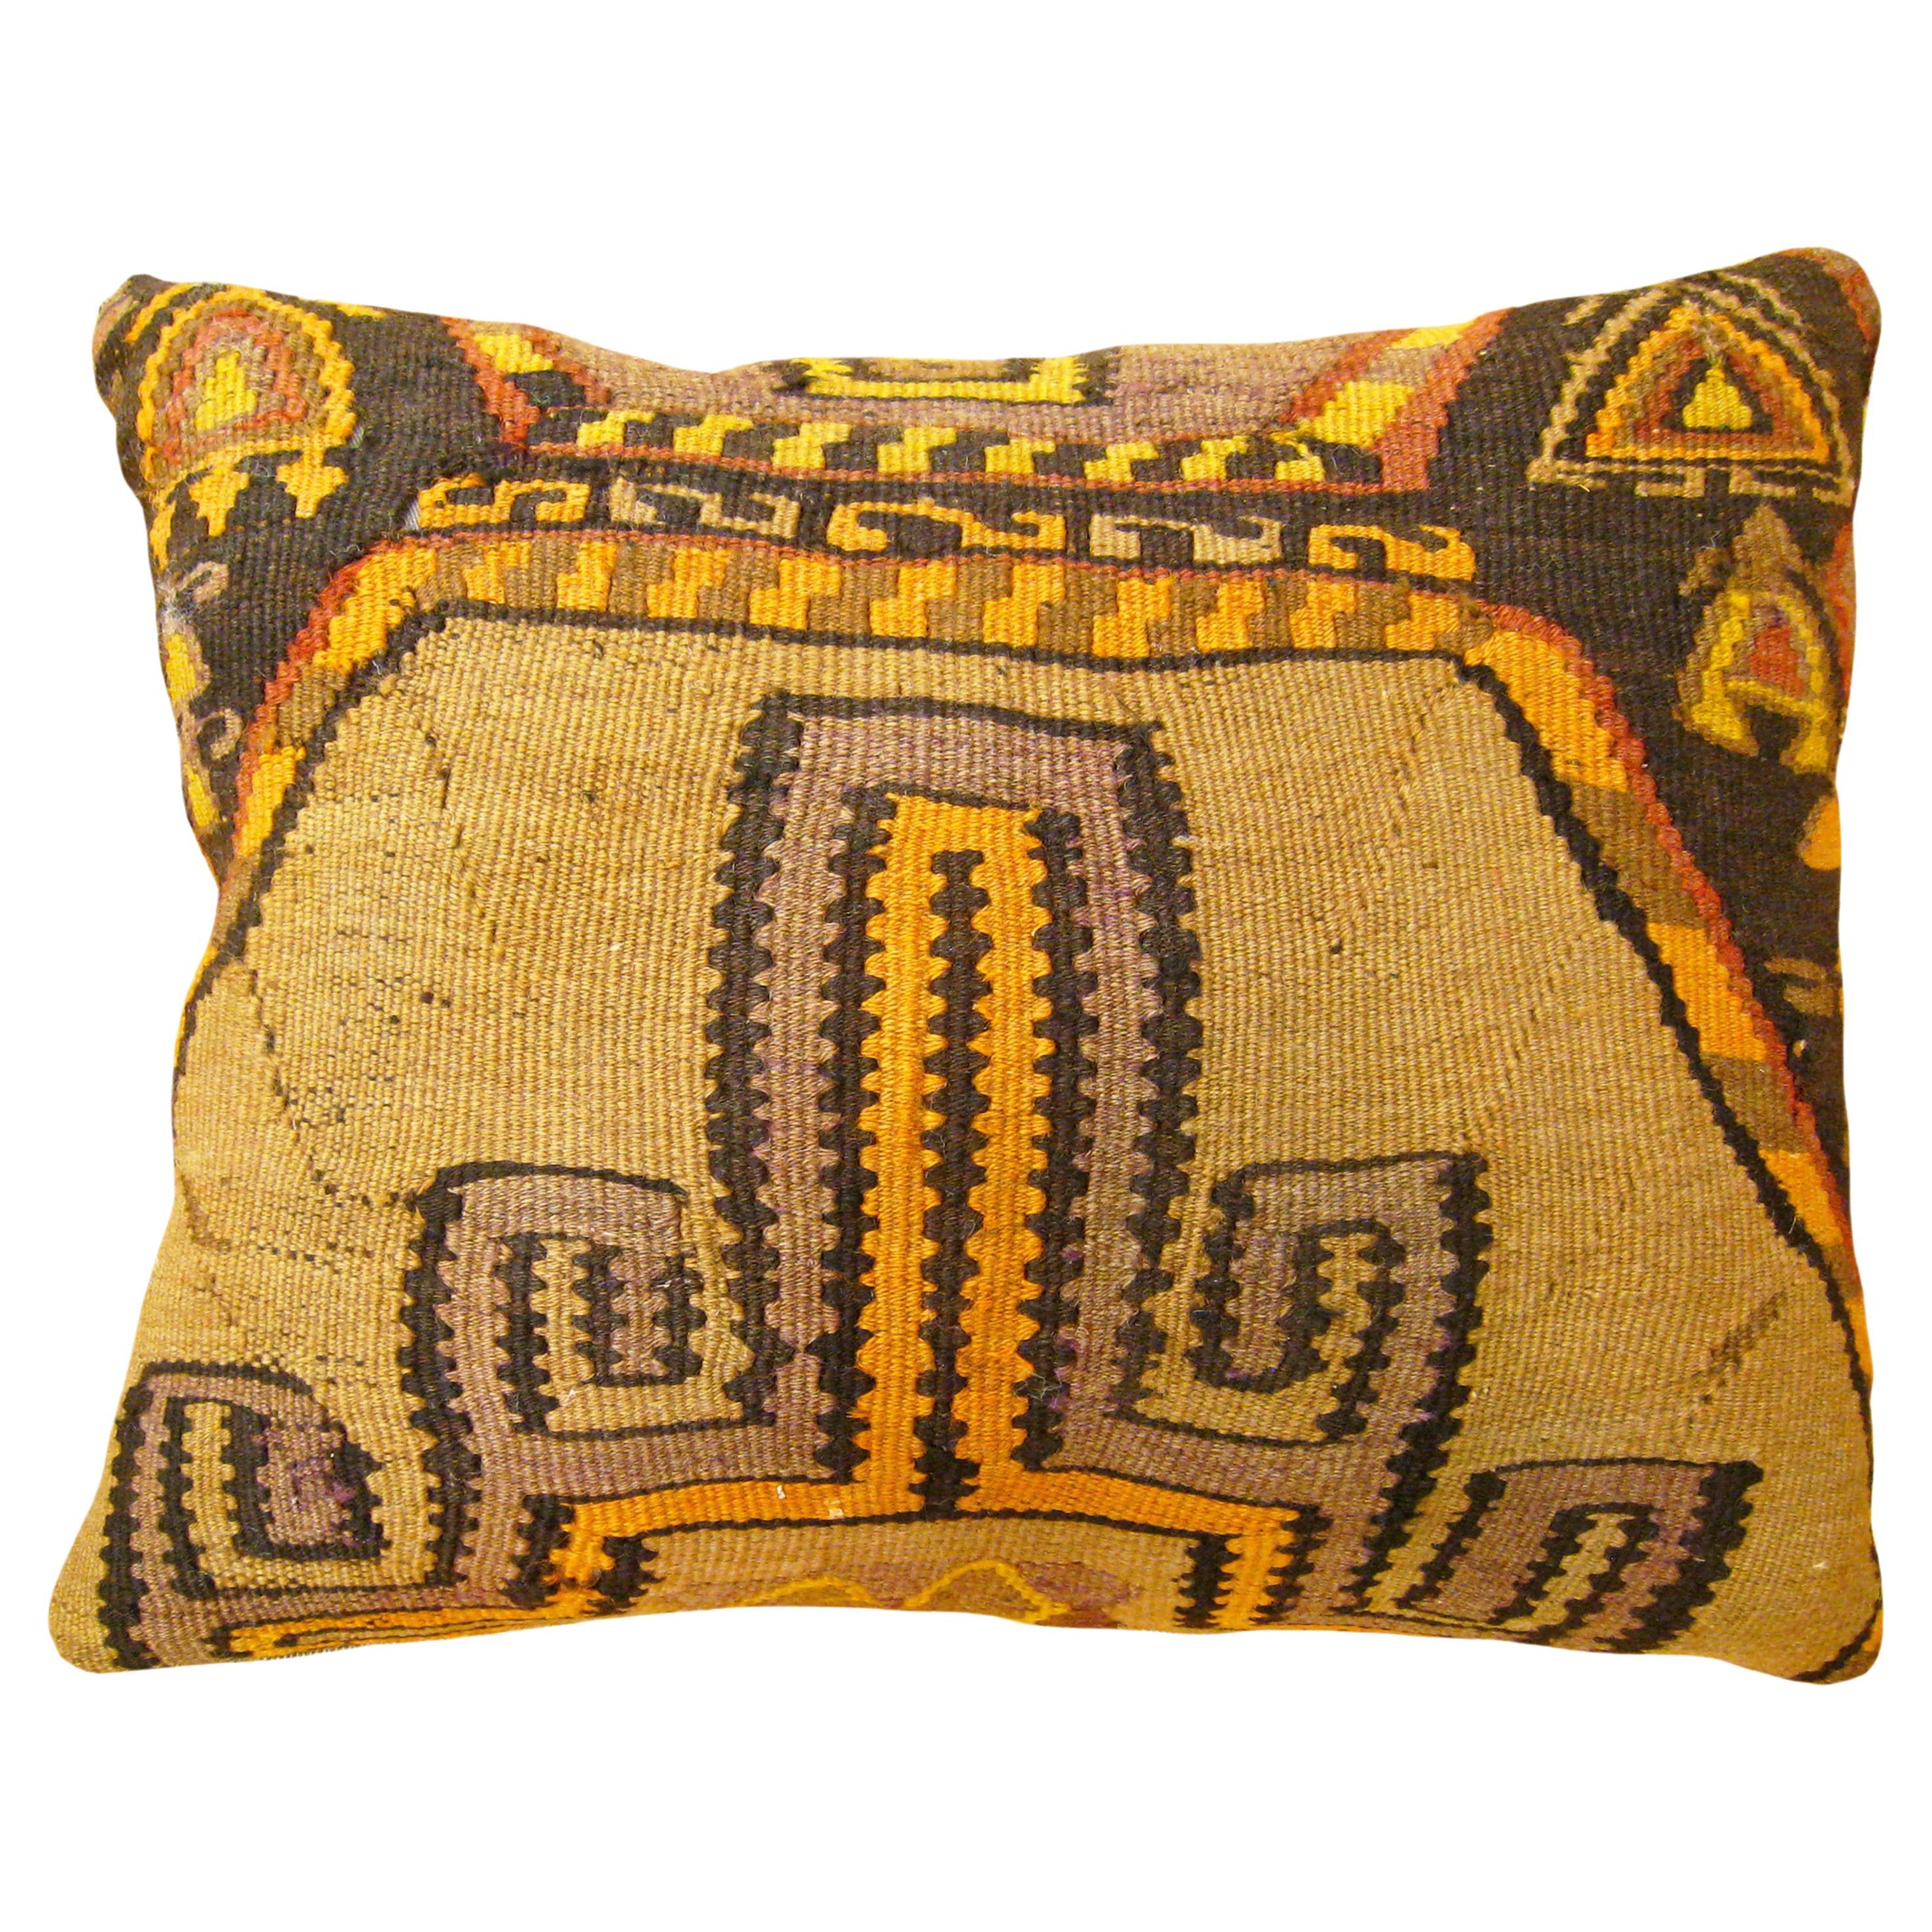 Decorative Vintage Turkish Kilim Rug Pillow with Geometric Abstracts For Sale